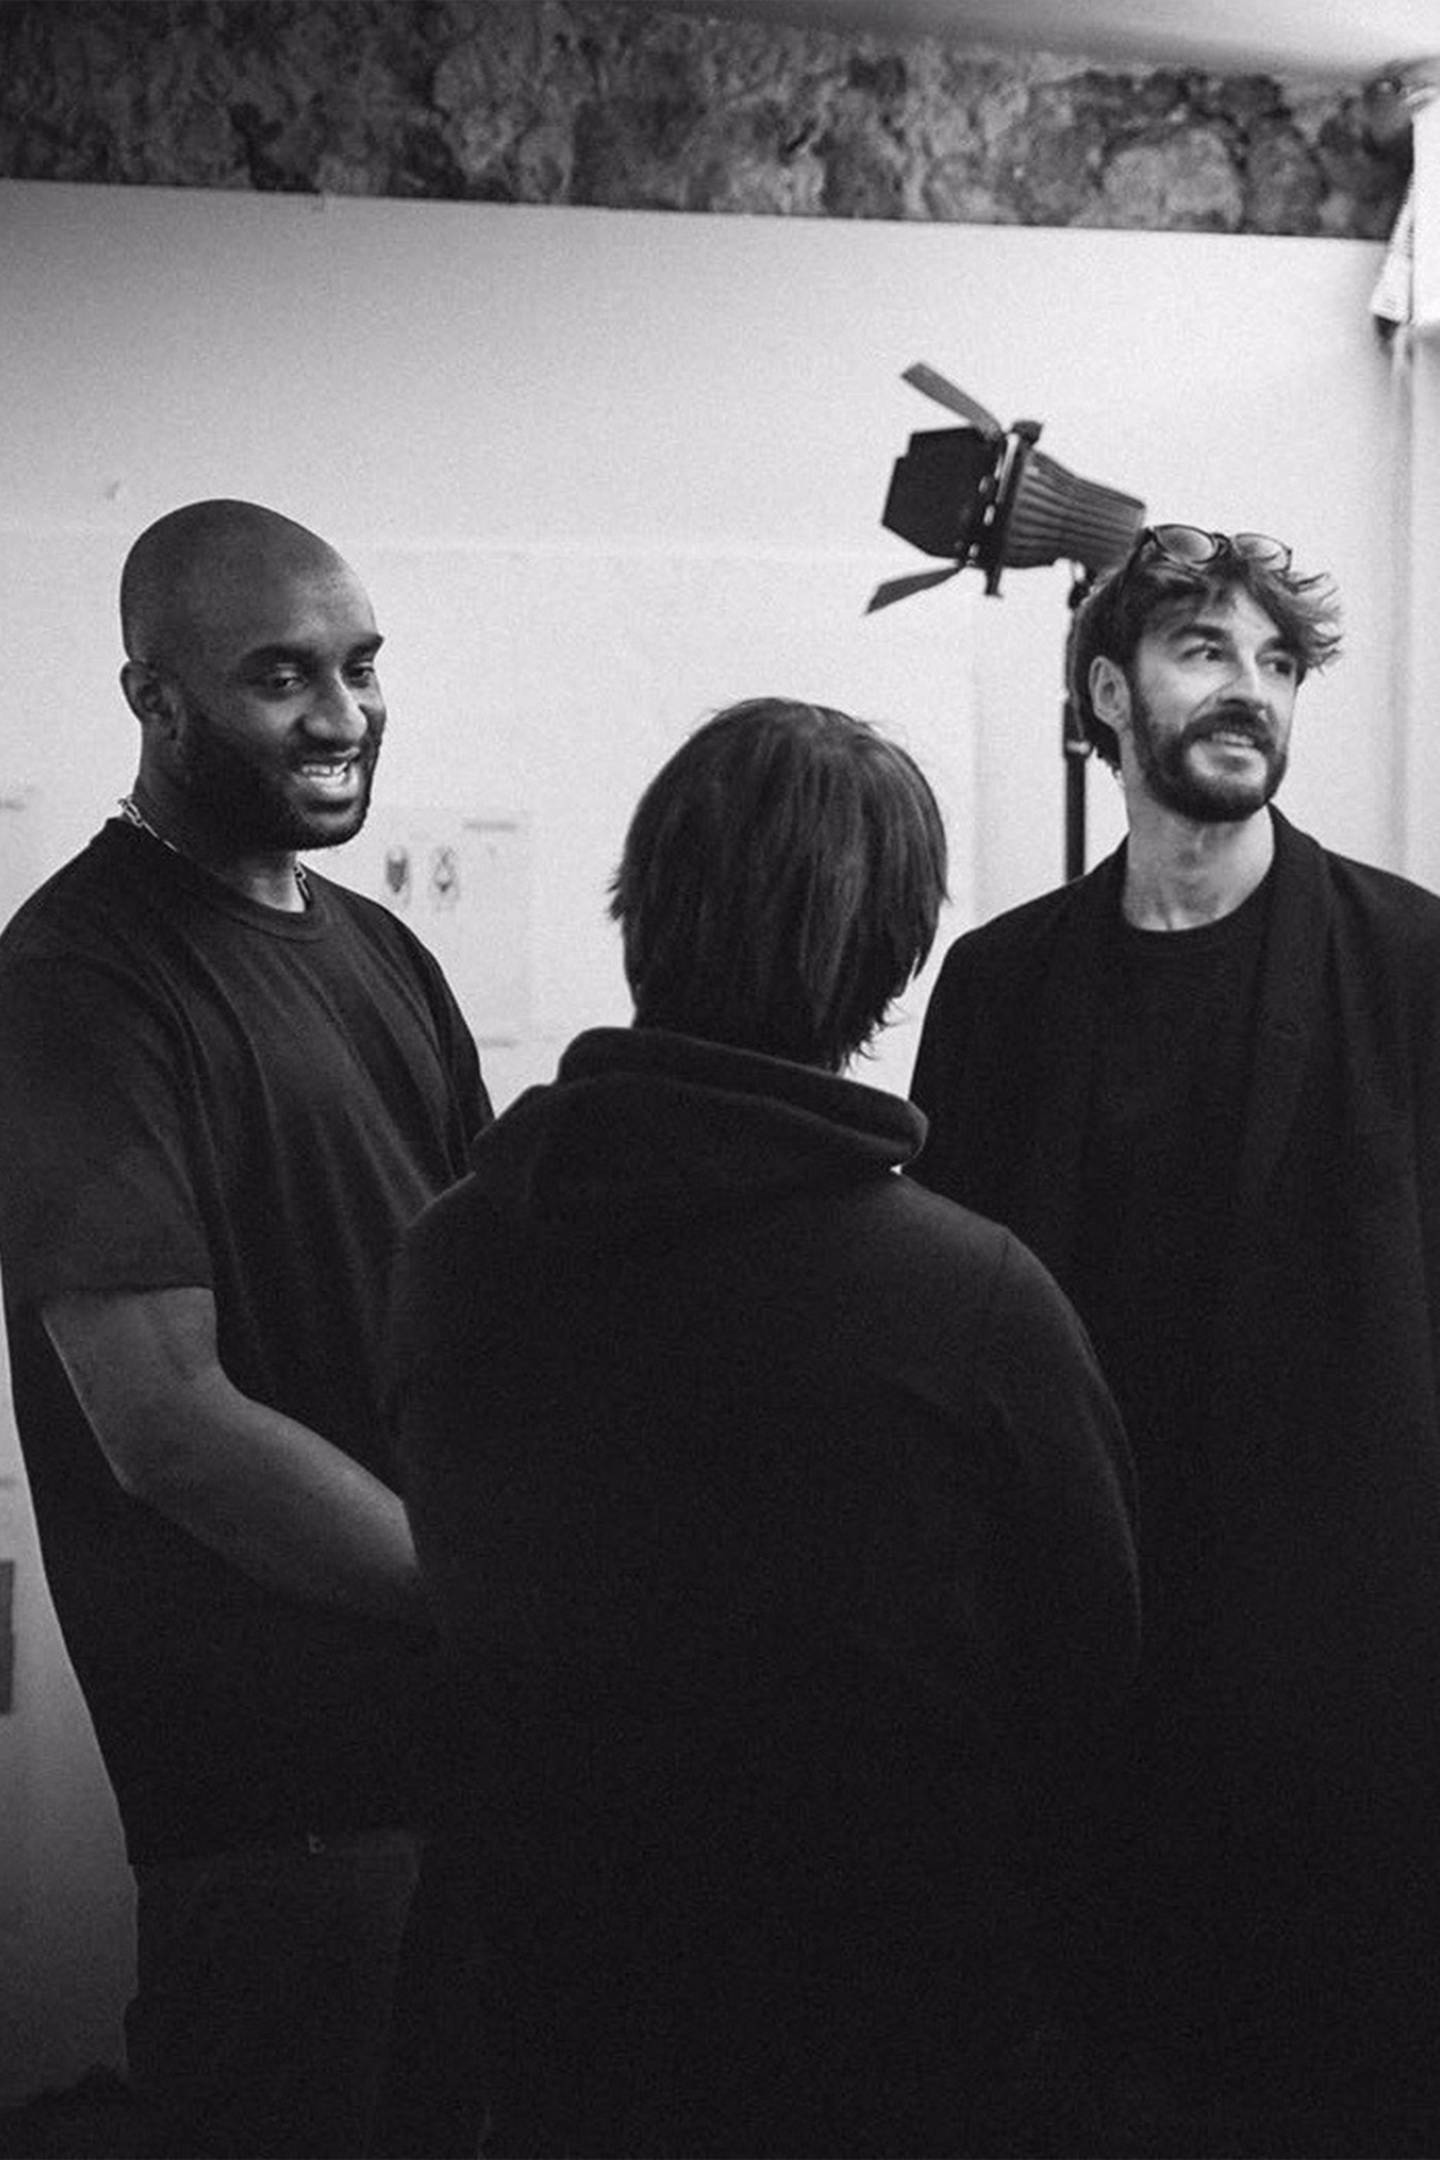 Virgil Abloh, Davide De Giglio and Andrea Grilli before Off-White’s Spring/Summer 2019 Women’s Ready-to-Wear show.